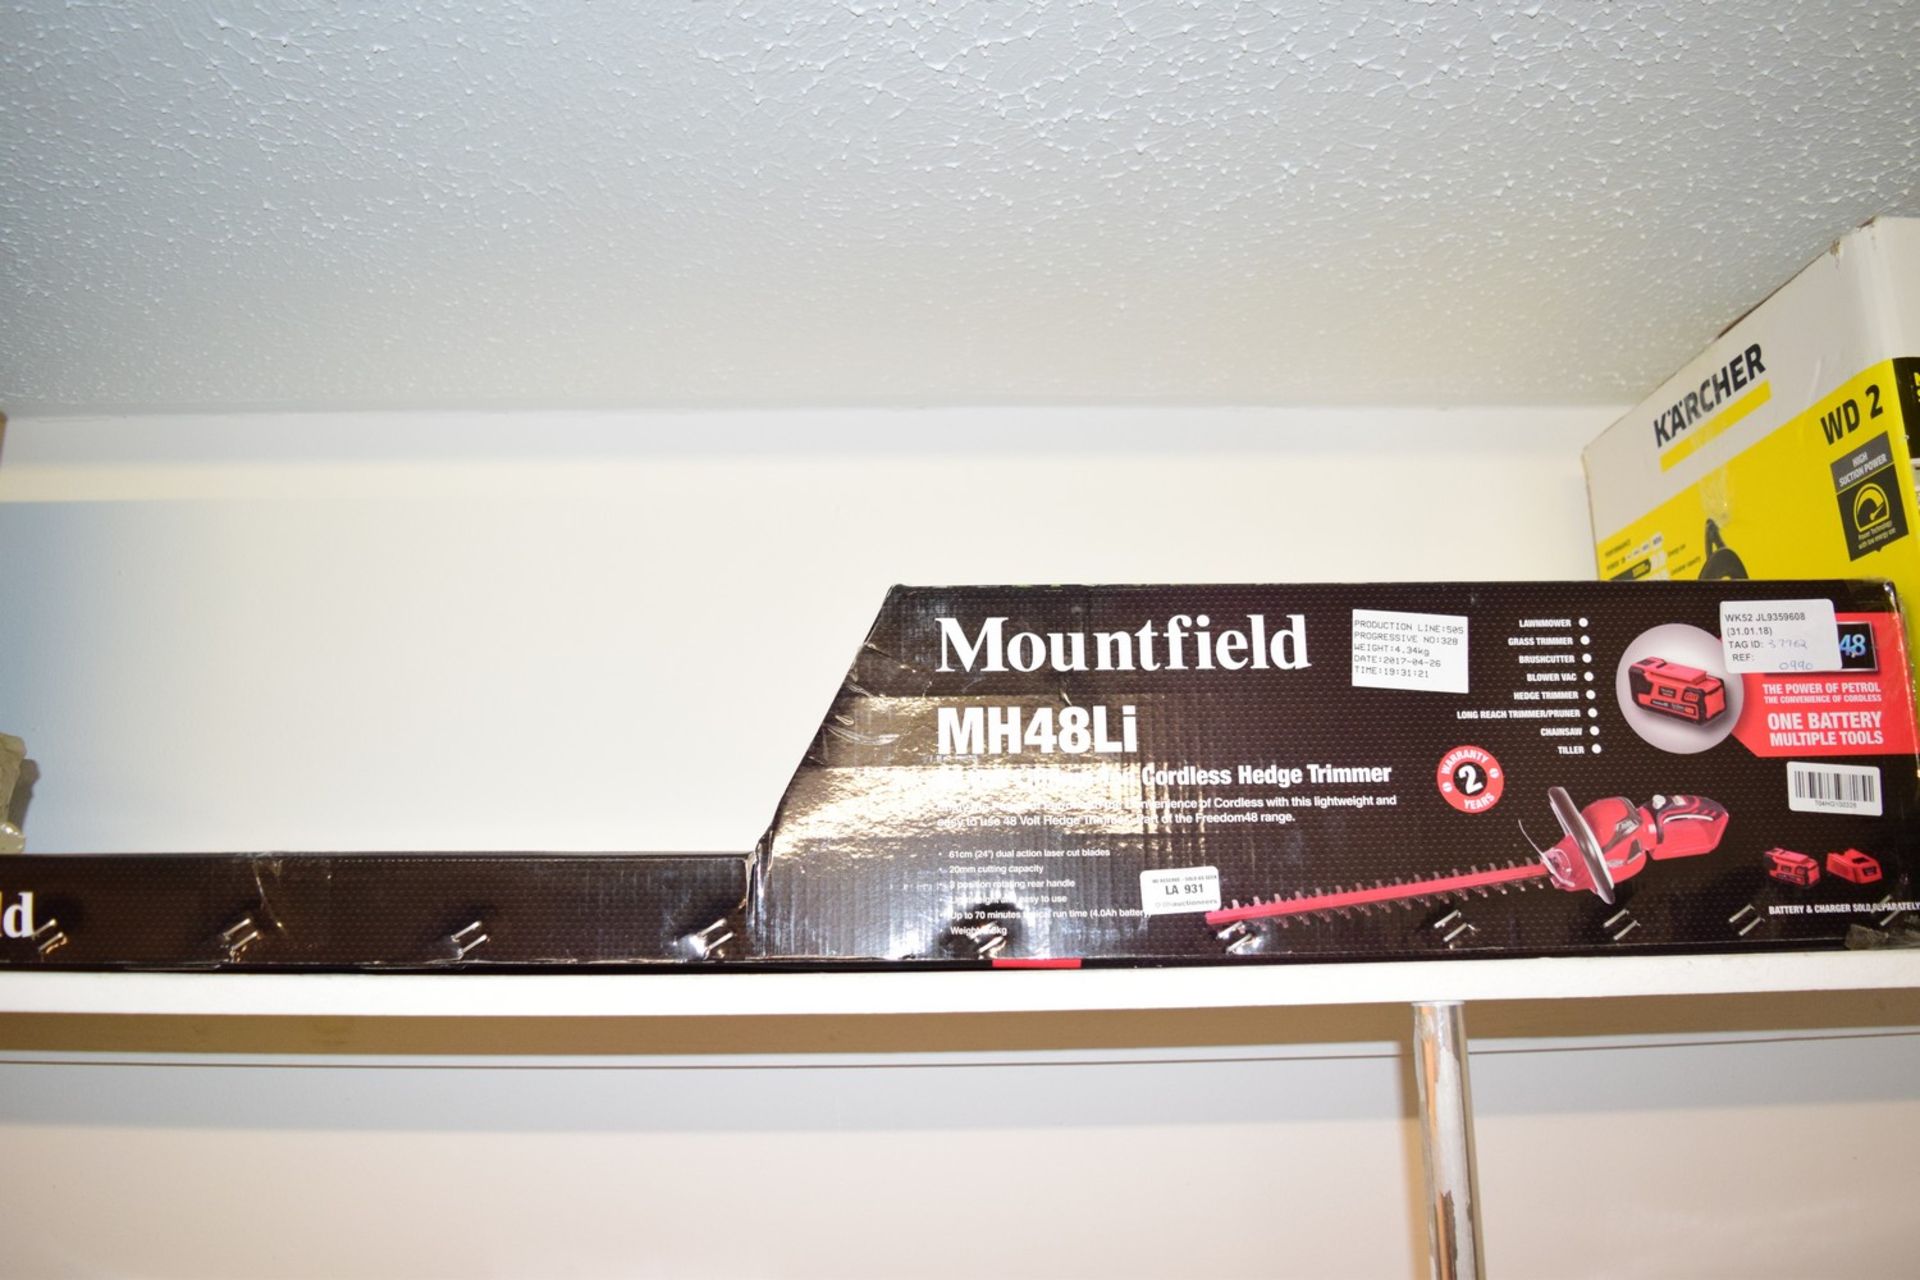 1 x BOXED MOUNTFIELD MH48LI CORDLESS HEDGE TRIMMER RRP £100 31.01.18 377629 *PLEASE NOTE THAT THE